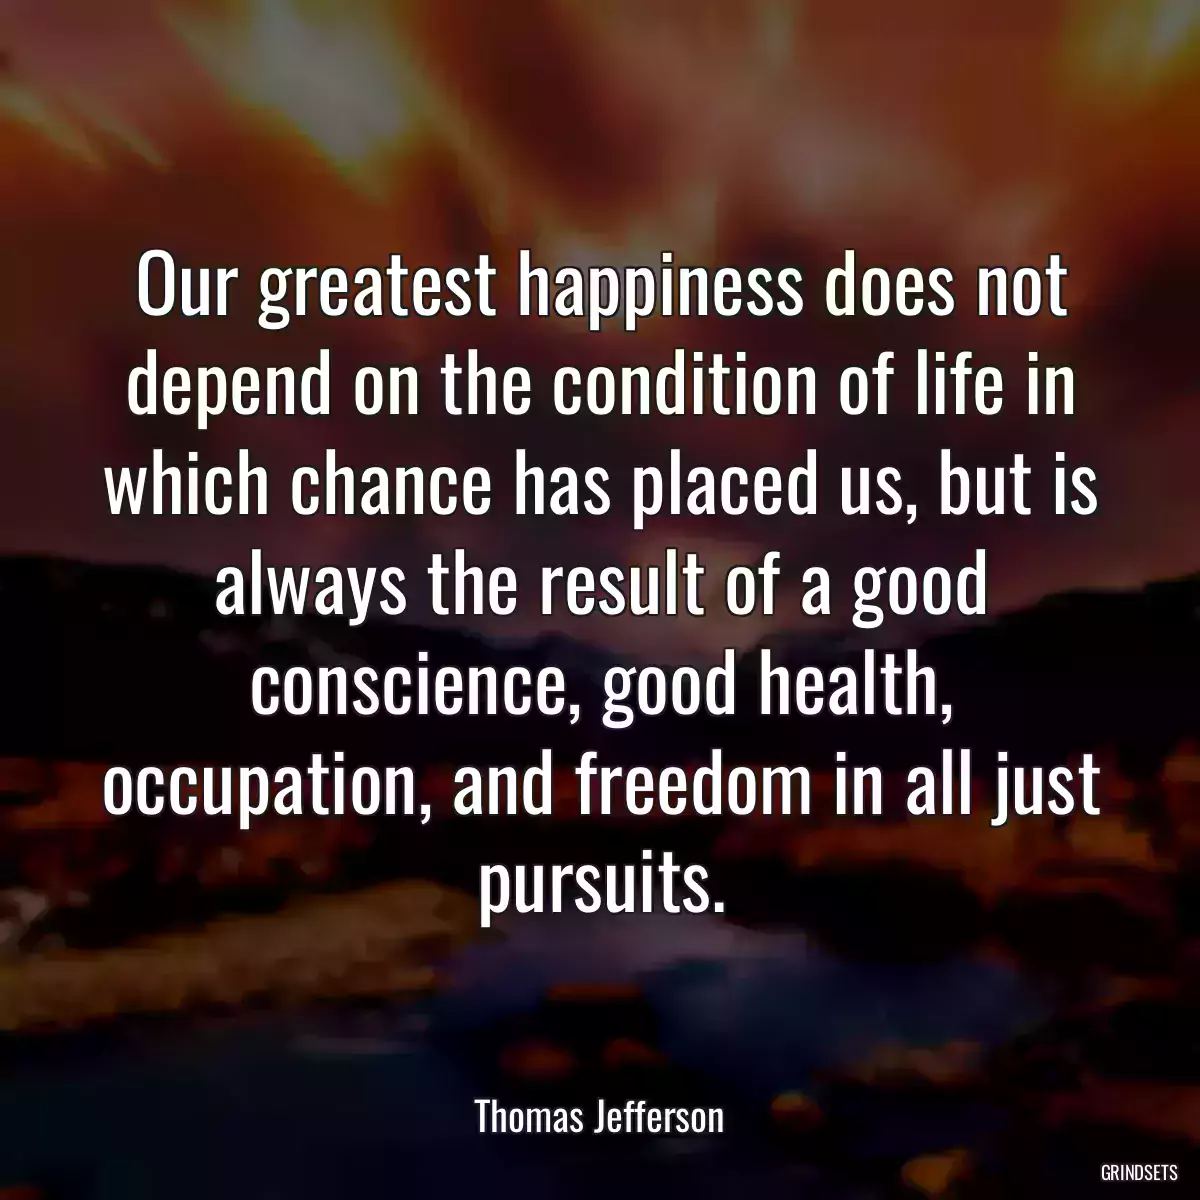 Our greatest happiness does not depend on the condition of life in which chance has placed us, but is always the result of a good conscience, good health, occupation, and freedom in all just pursuits.